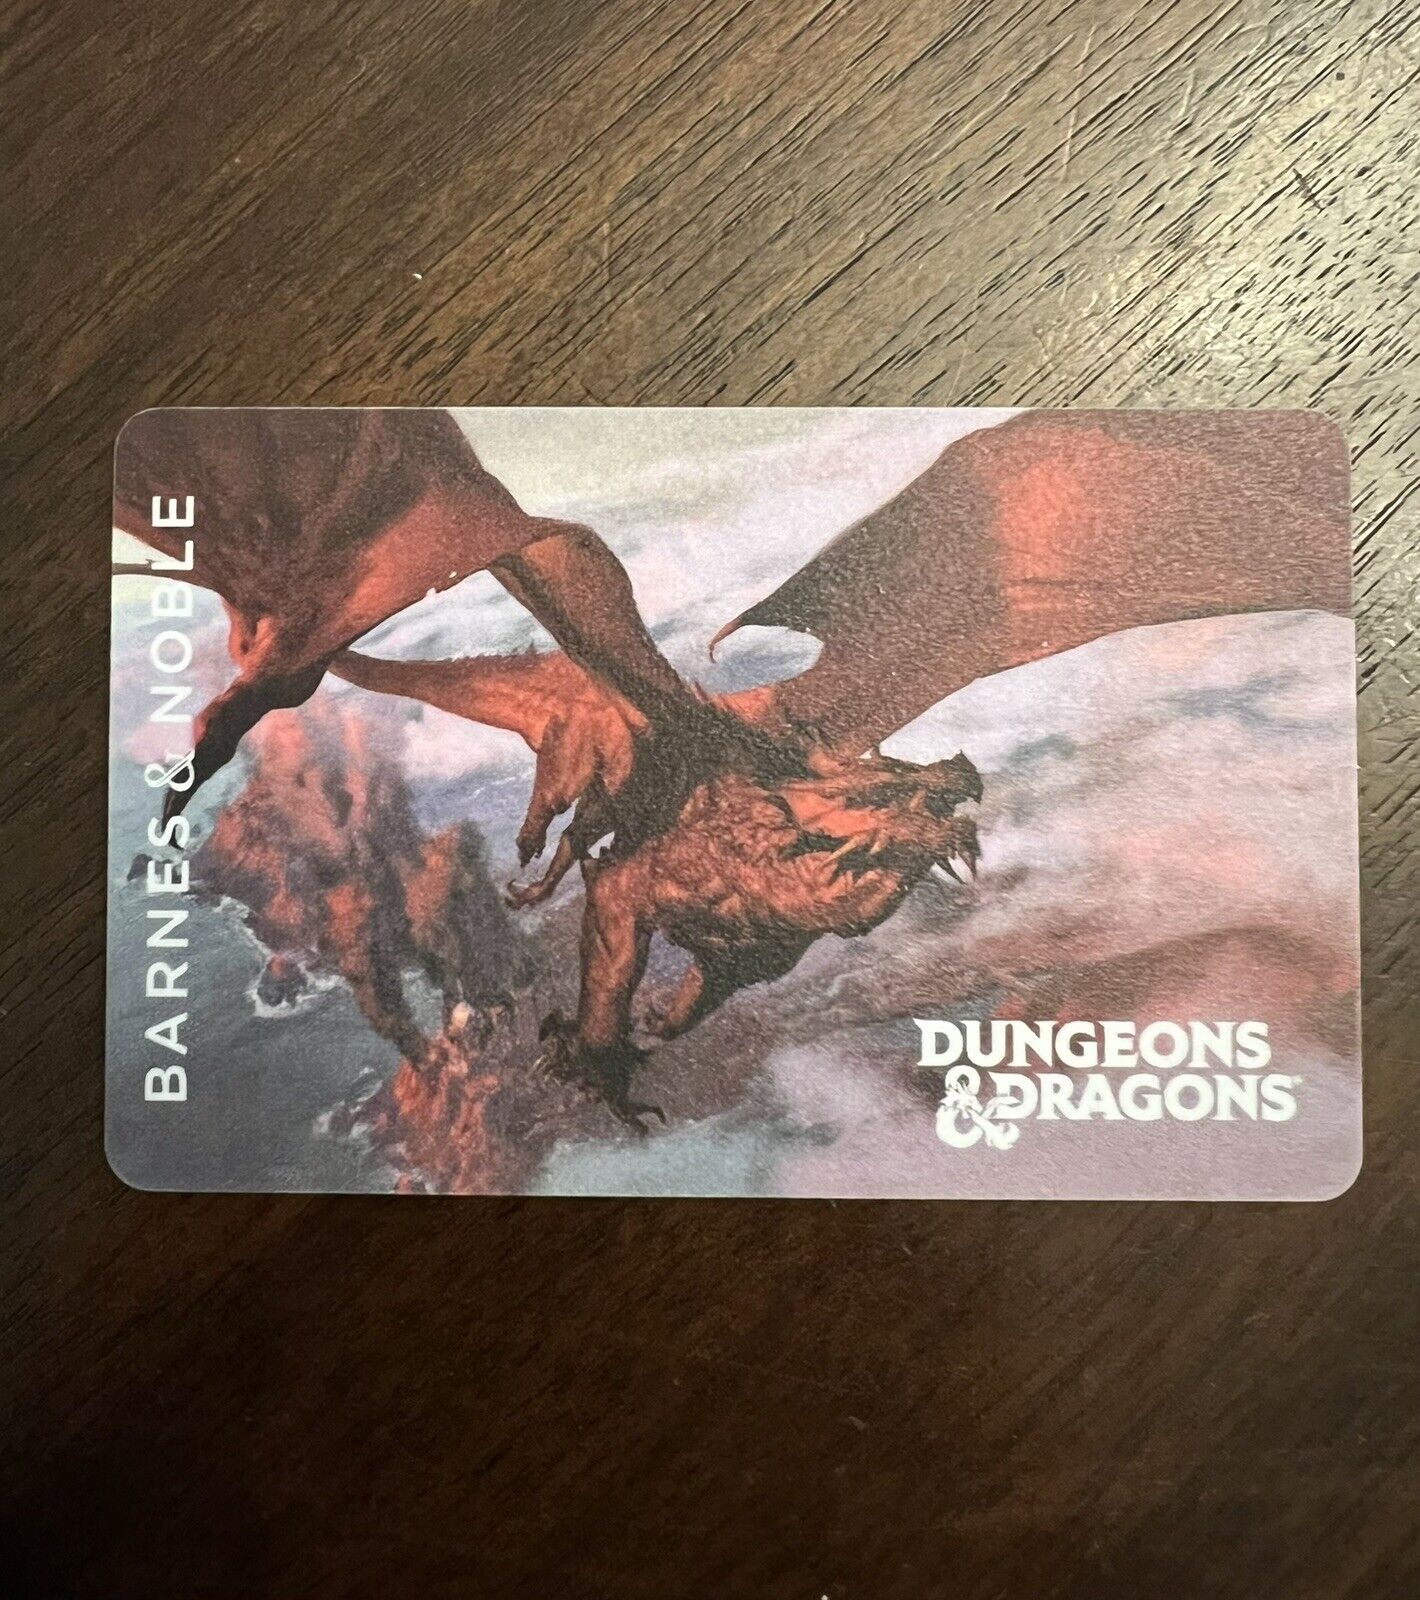 DUNGEONS & DRAGONS BARNES & NOBLE GIFT CARD MINT